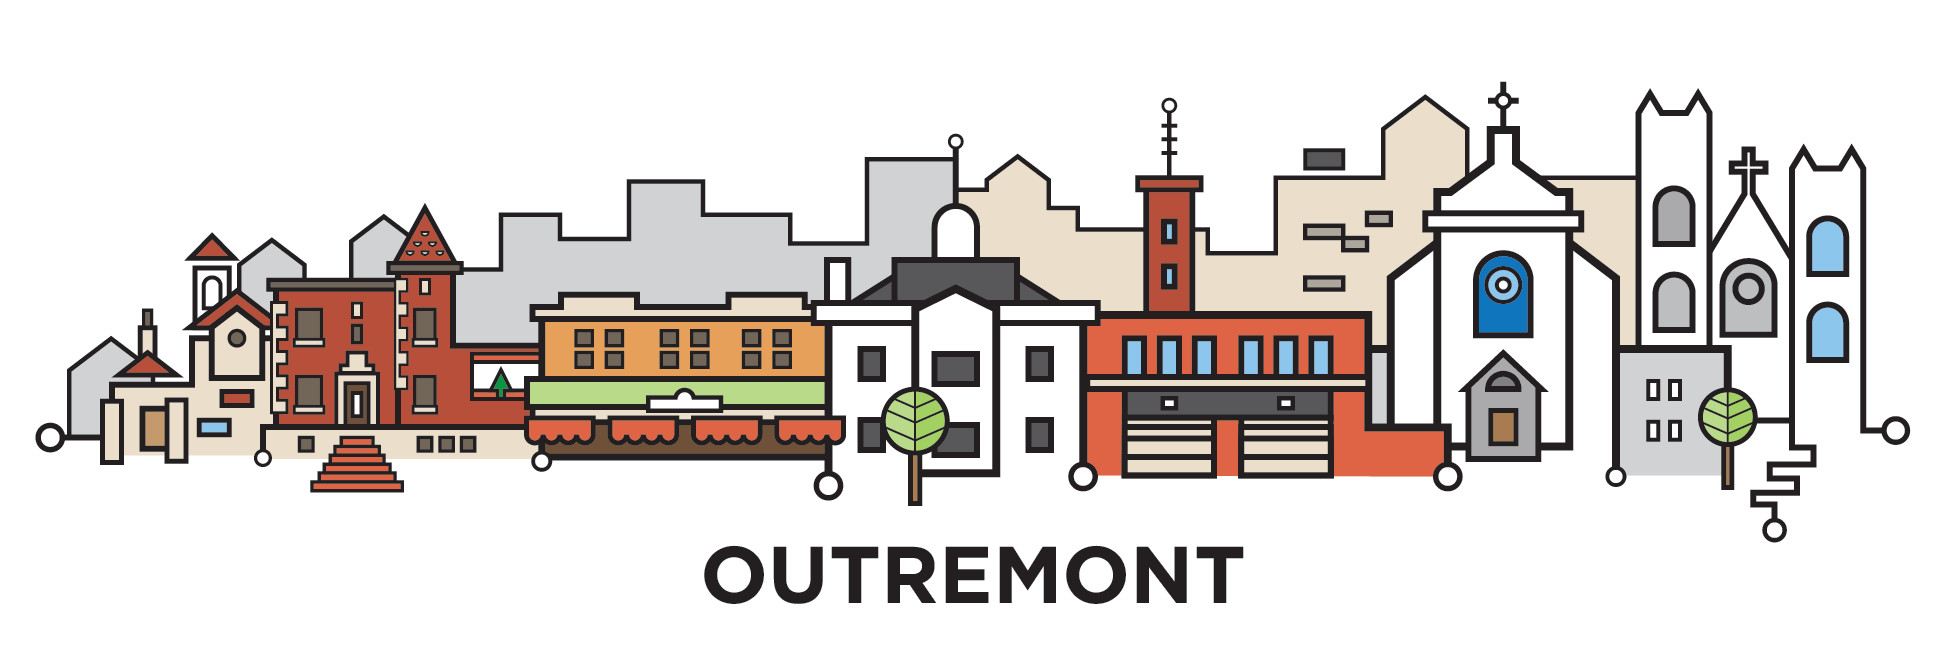 mtl-outremont-cityline-illustration-by-loogart